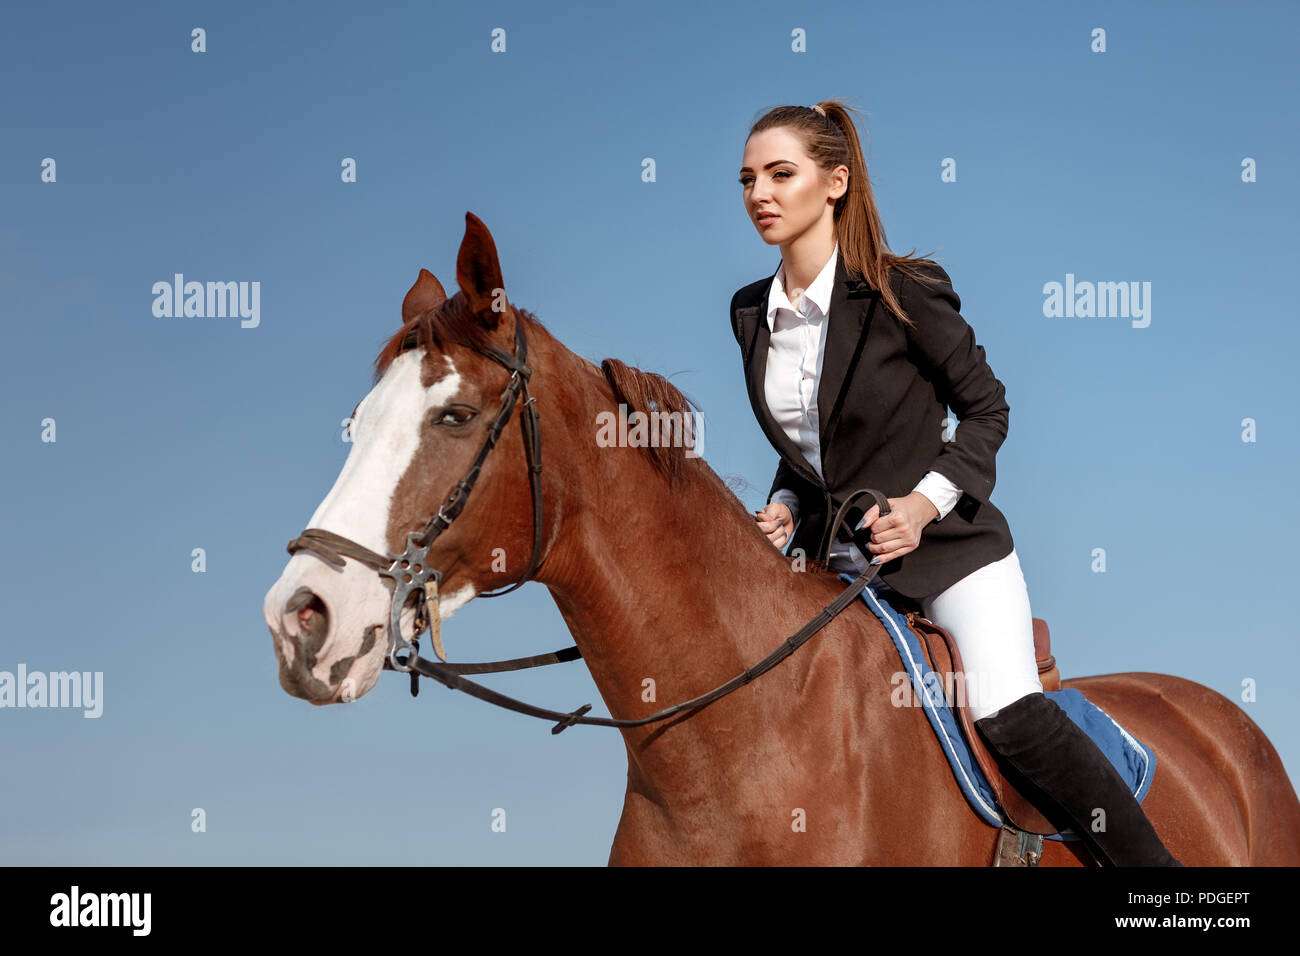 Rider elegant woman riding her horse outside Stock Photo